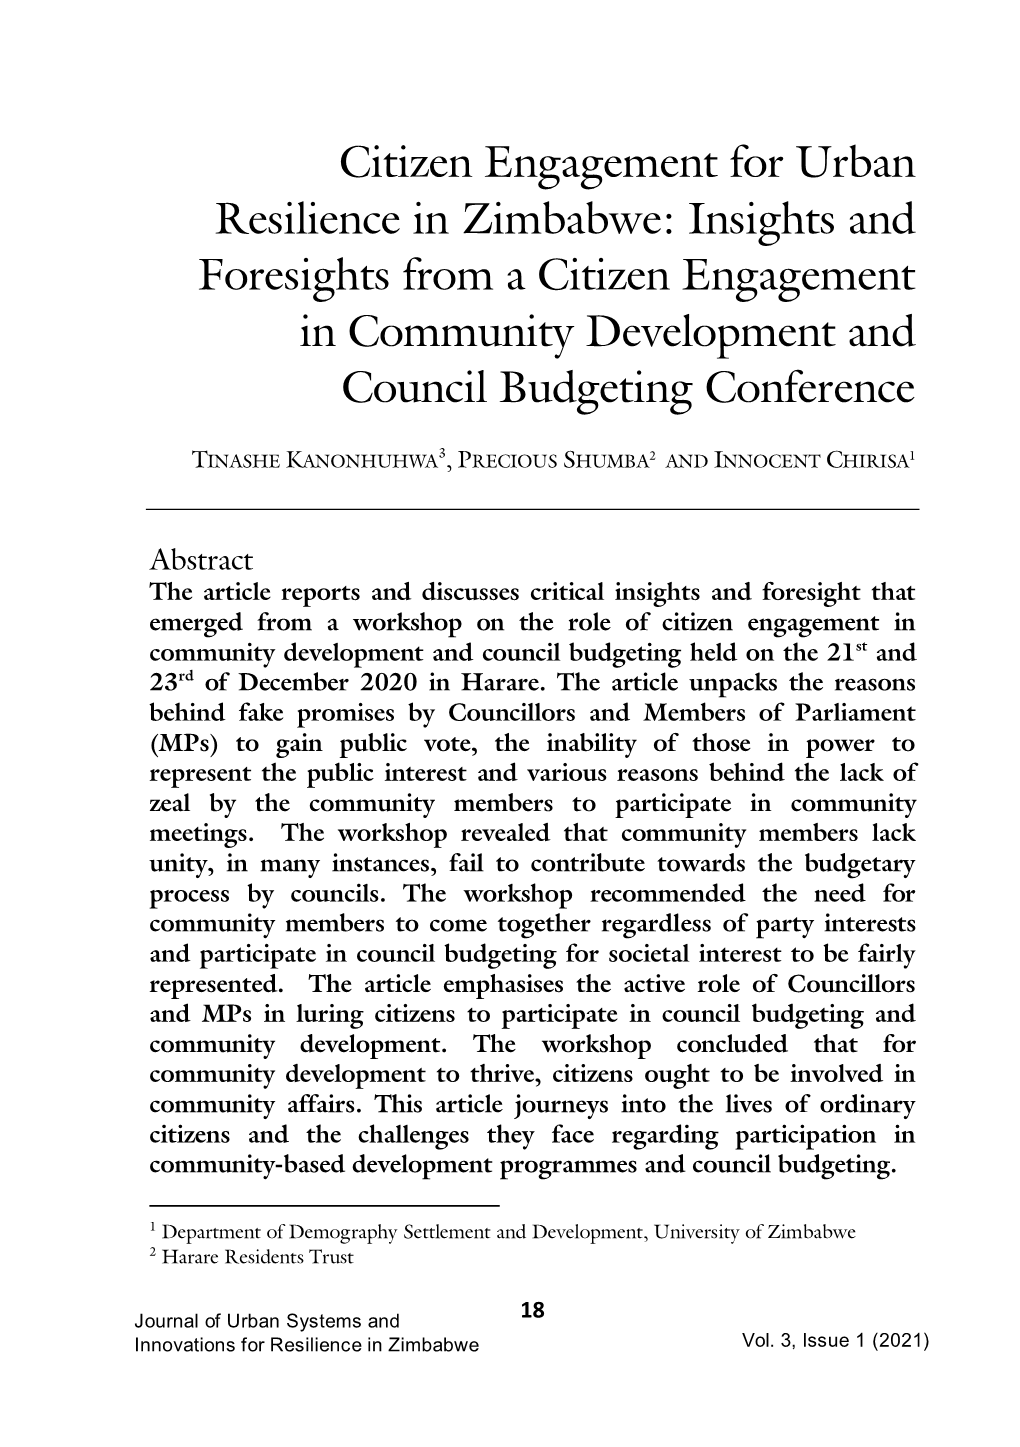 Citizen Engagement for Urban Resilience in Zimbabwe: Insights and Foresights from a Citizen Engagement in Community Development and Council Budgeting Conference